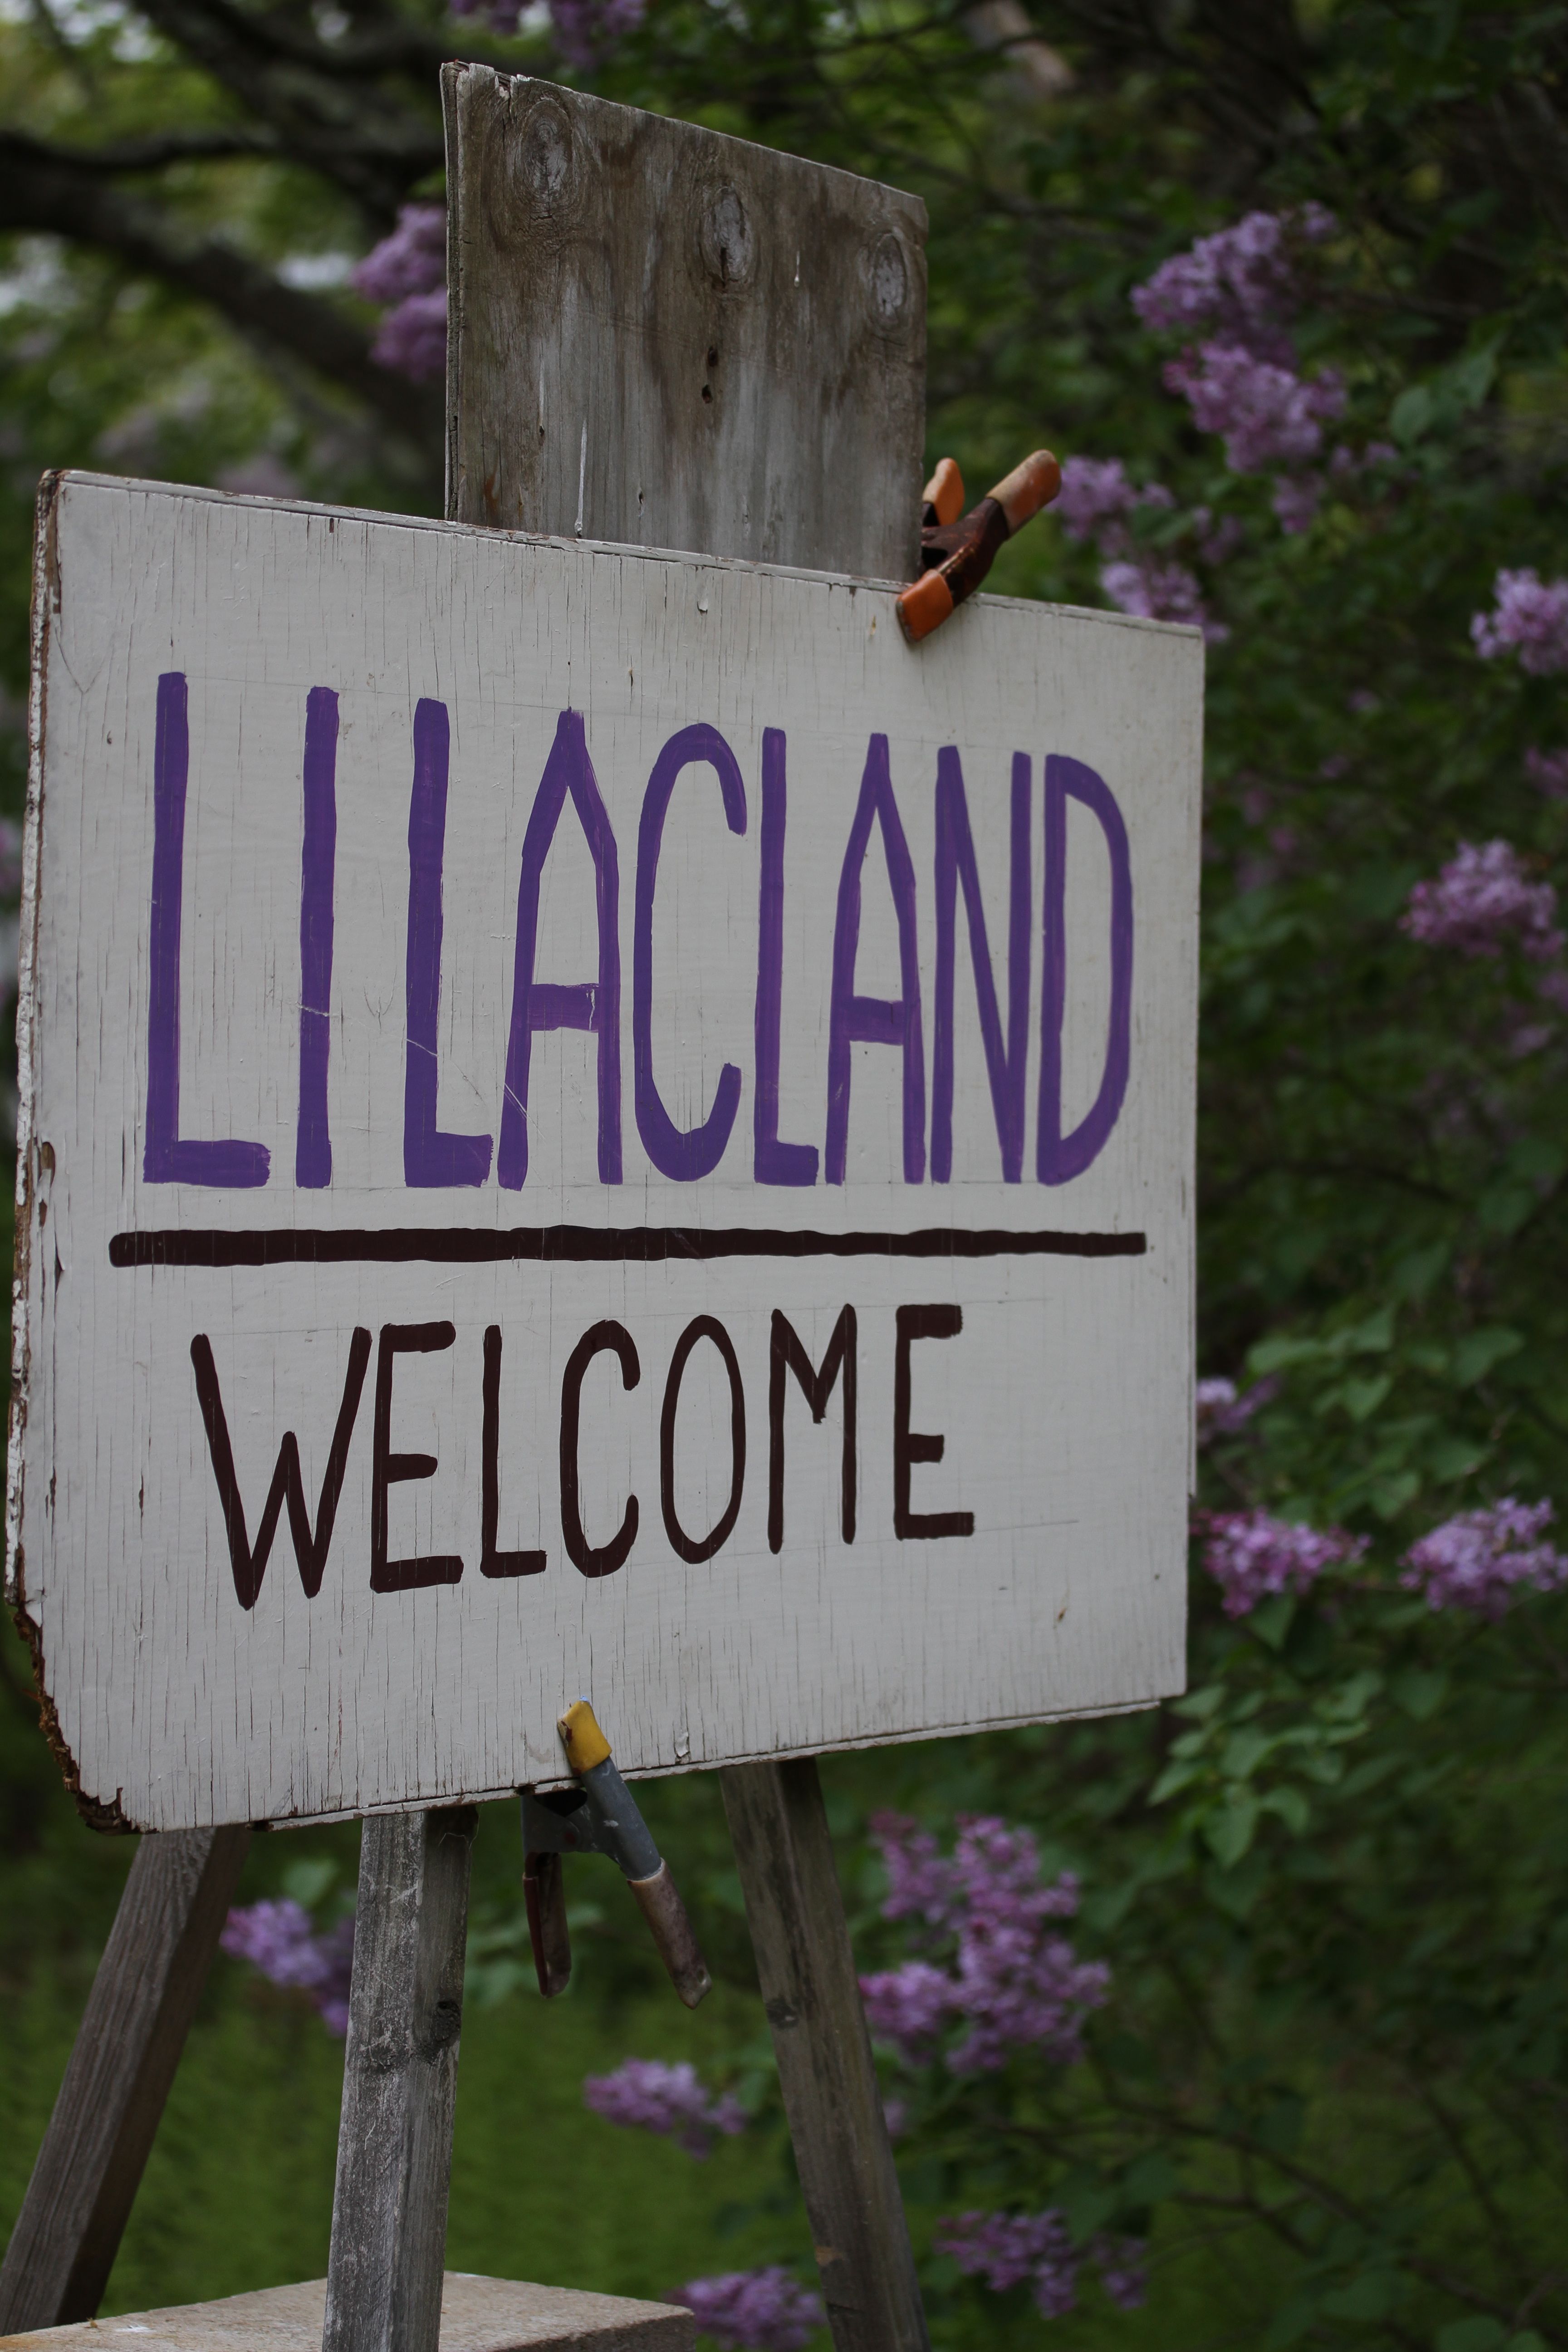 Welcome to Lilacland indeed.